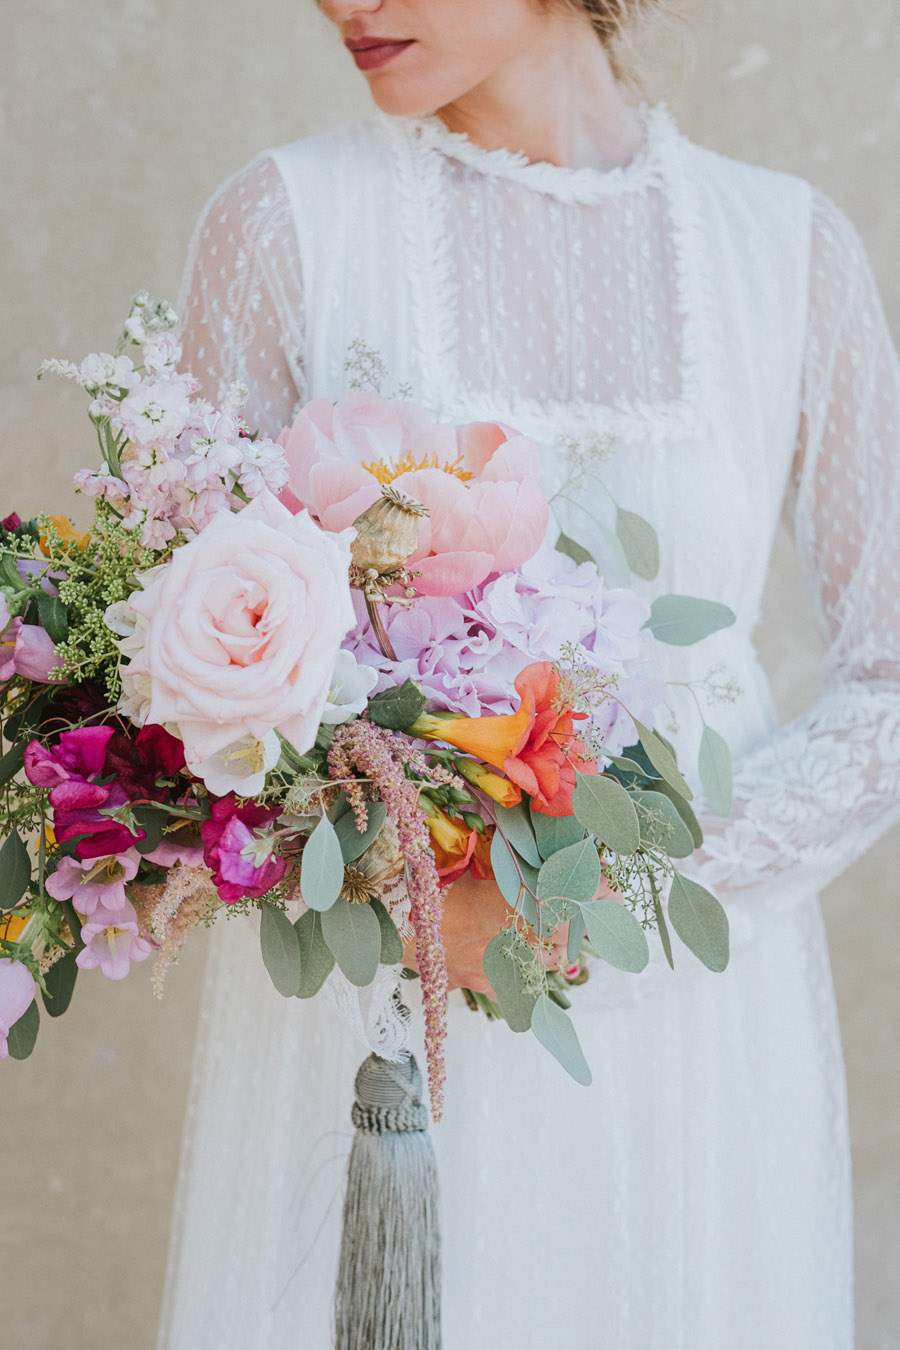 Art Nouveau Wedding Inspiration With Ethereal Vibes at Palazzo Arabesco, Italy